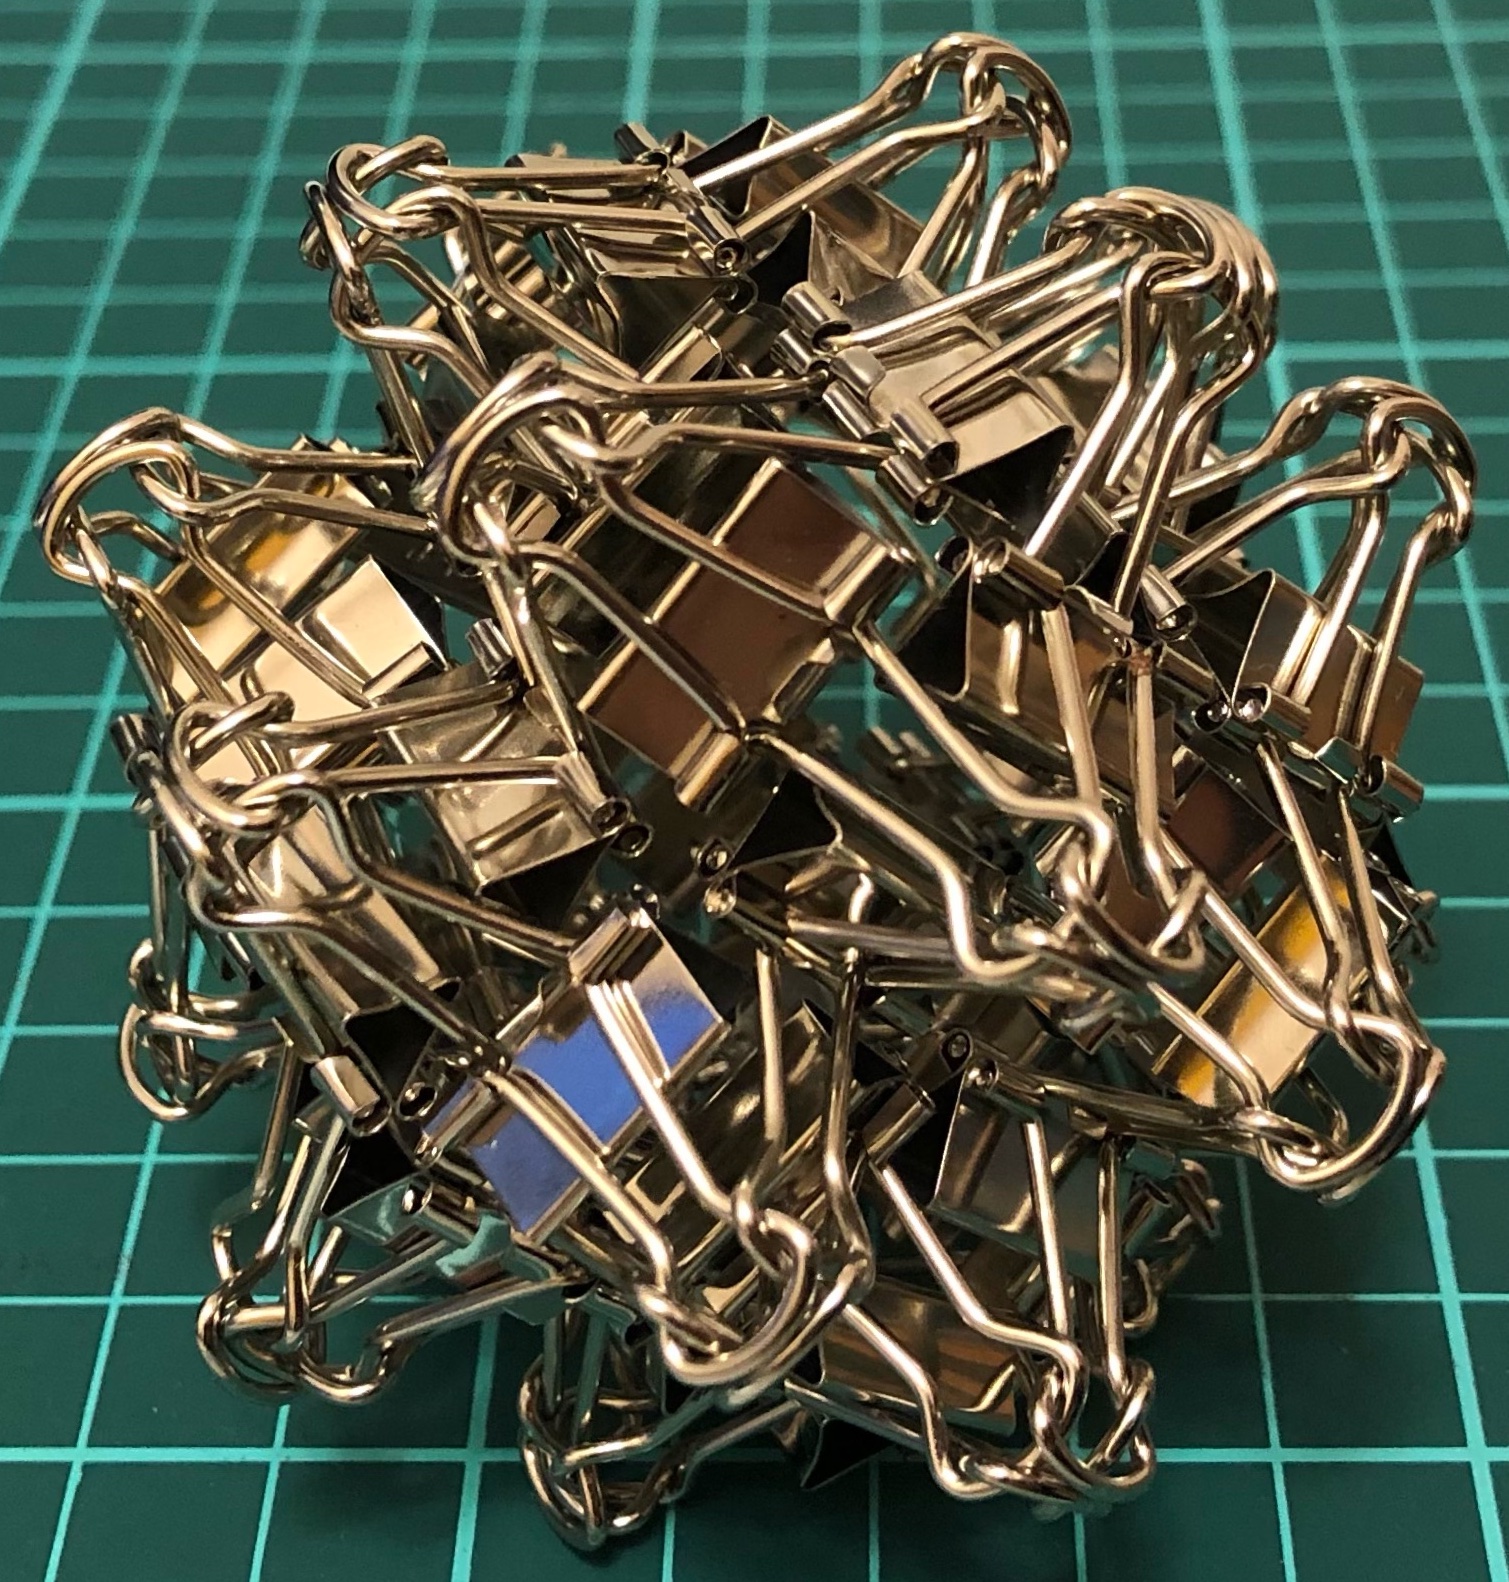 48 clips forming spiky rhombicuboctahedron